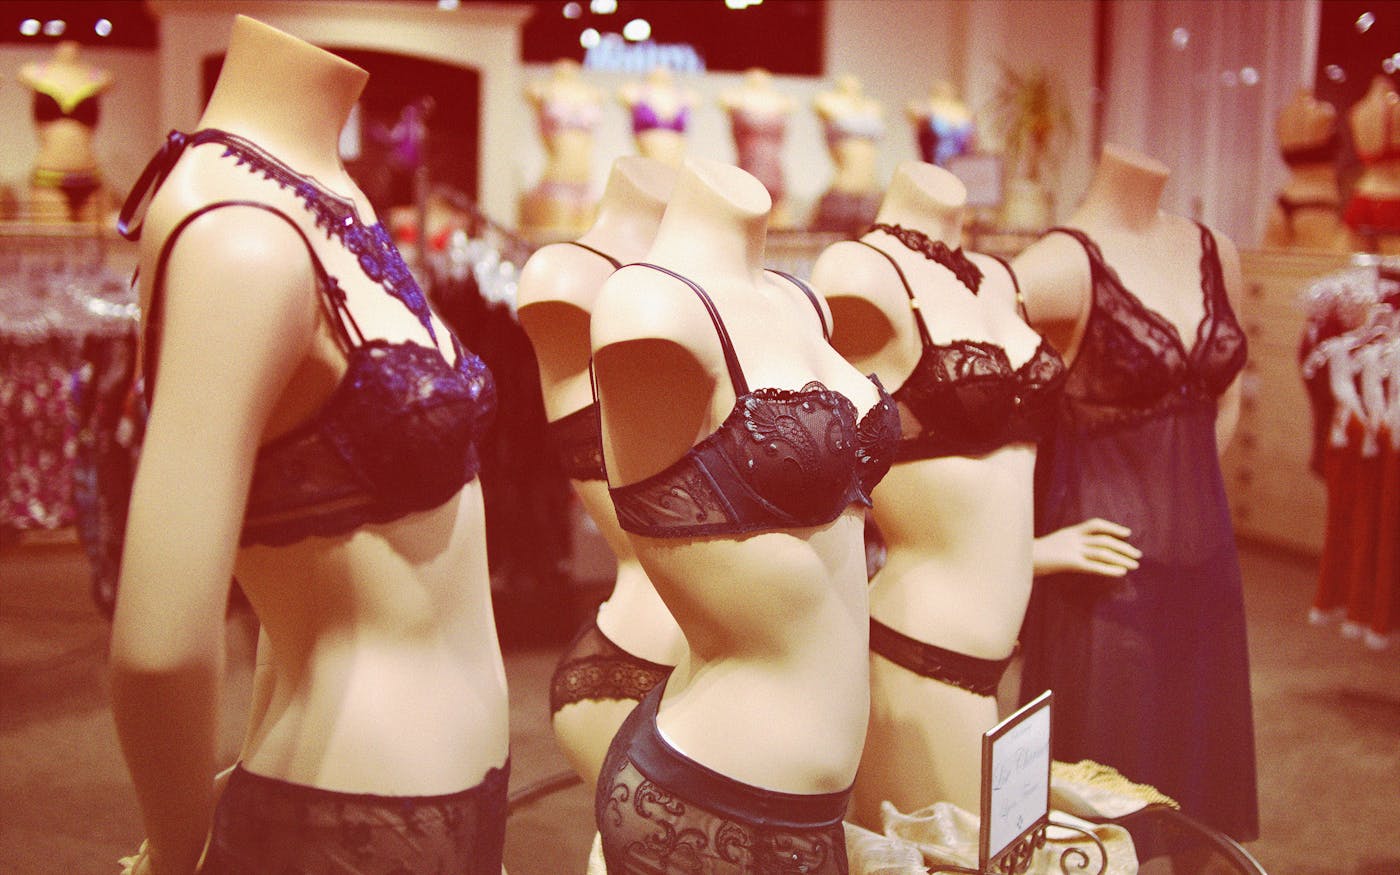 The best bra shops in Dallas lift your spirits and your saggy